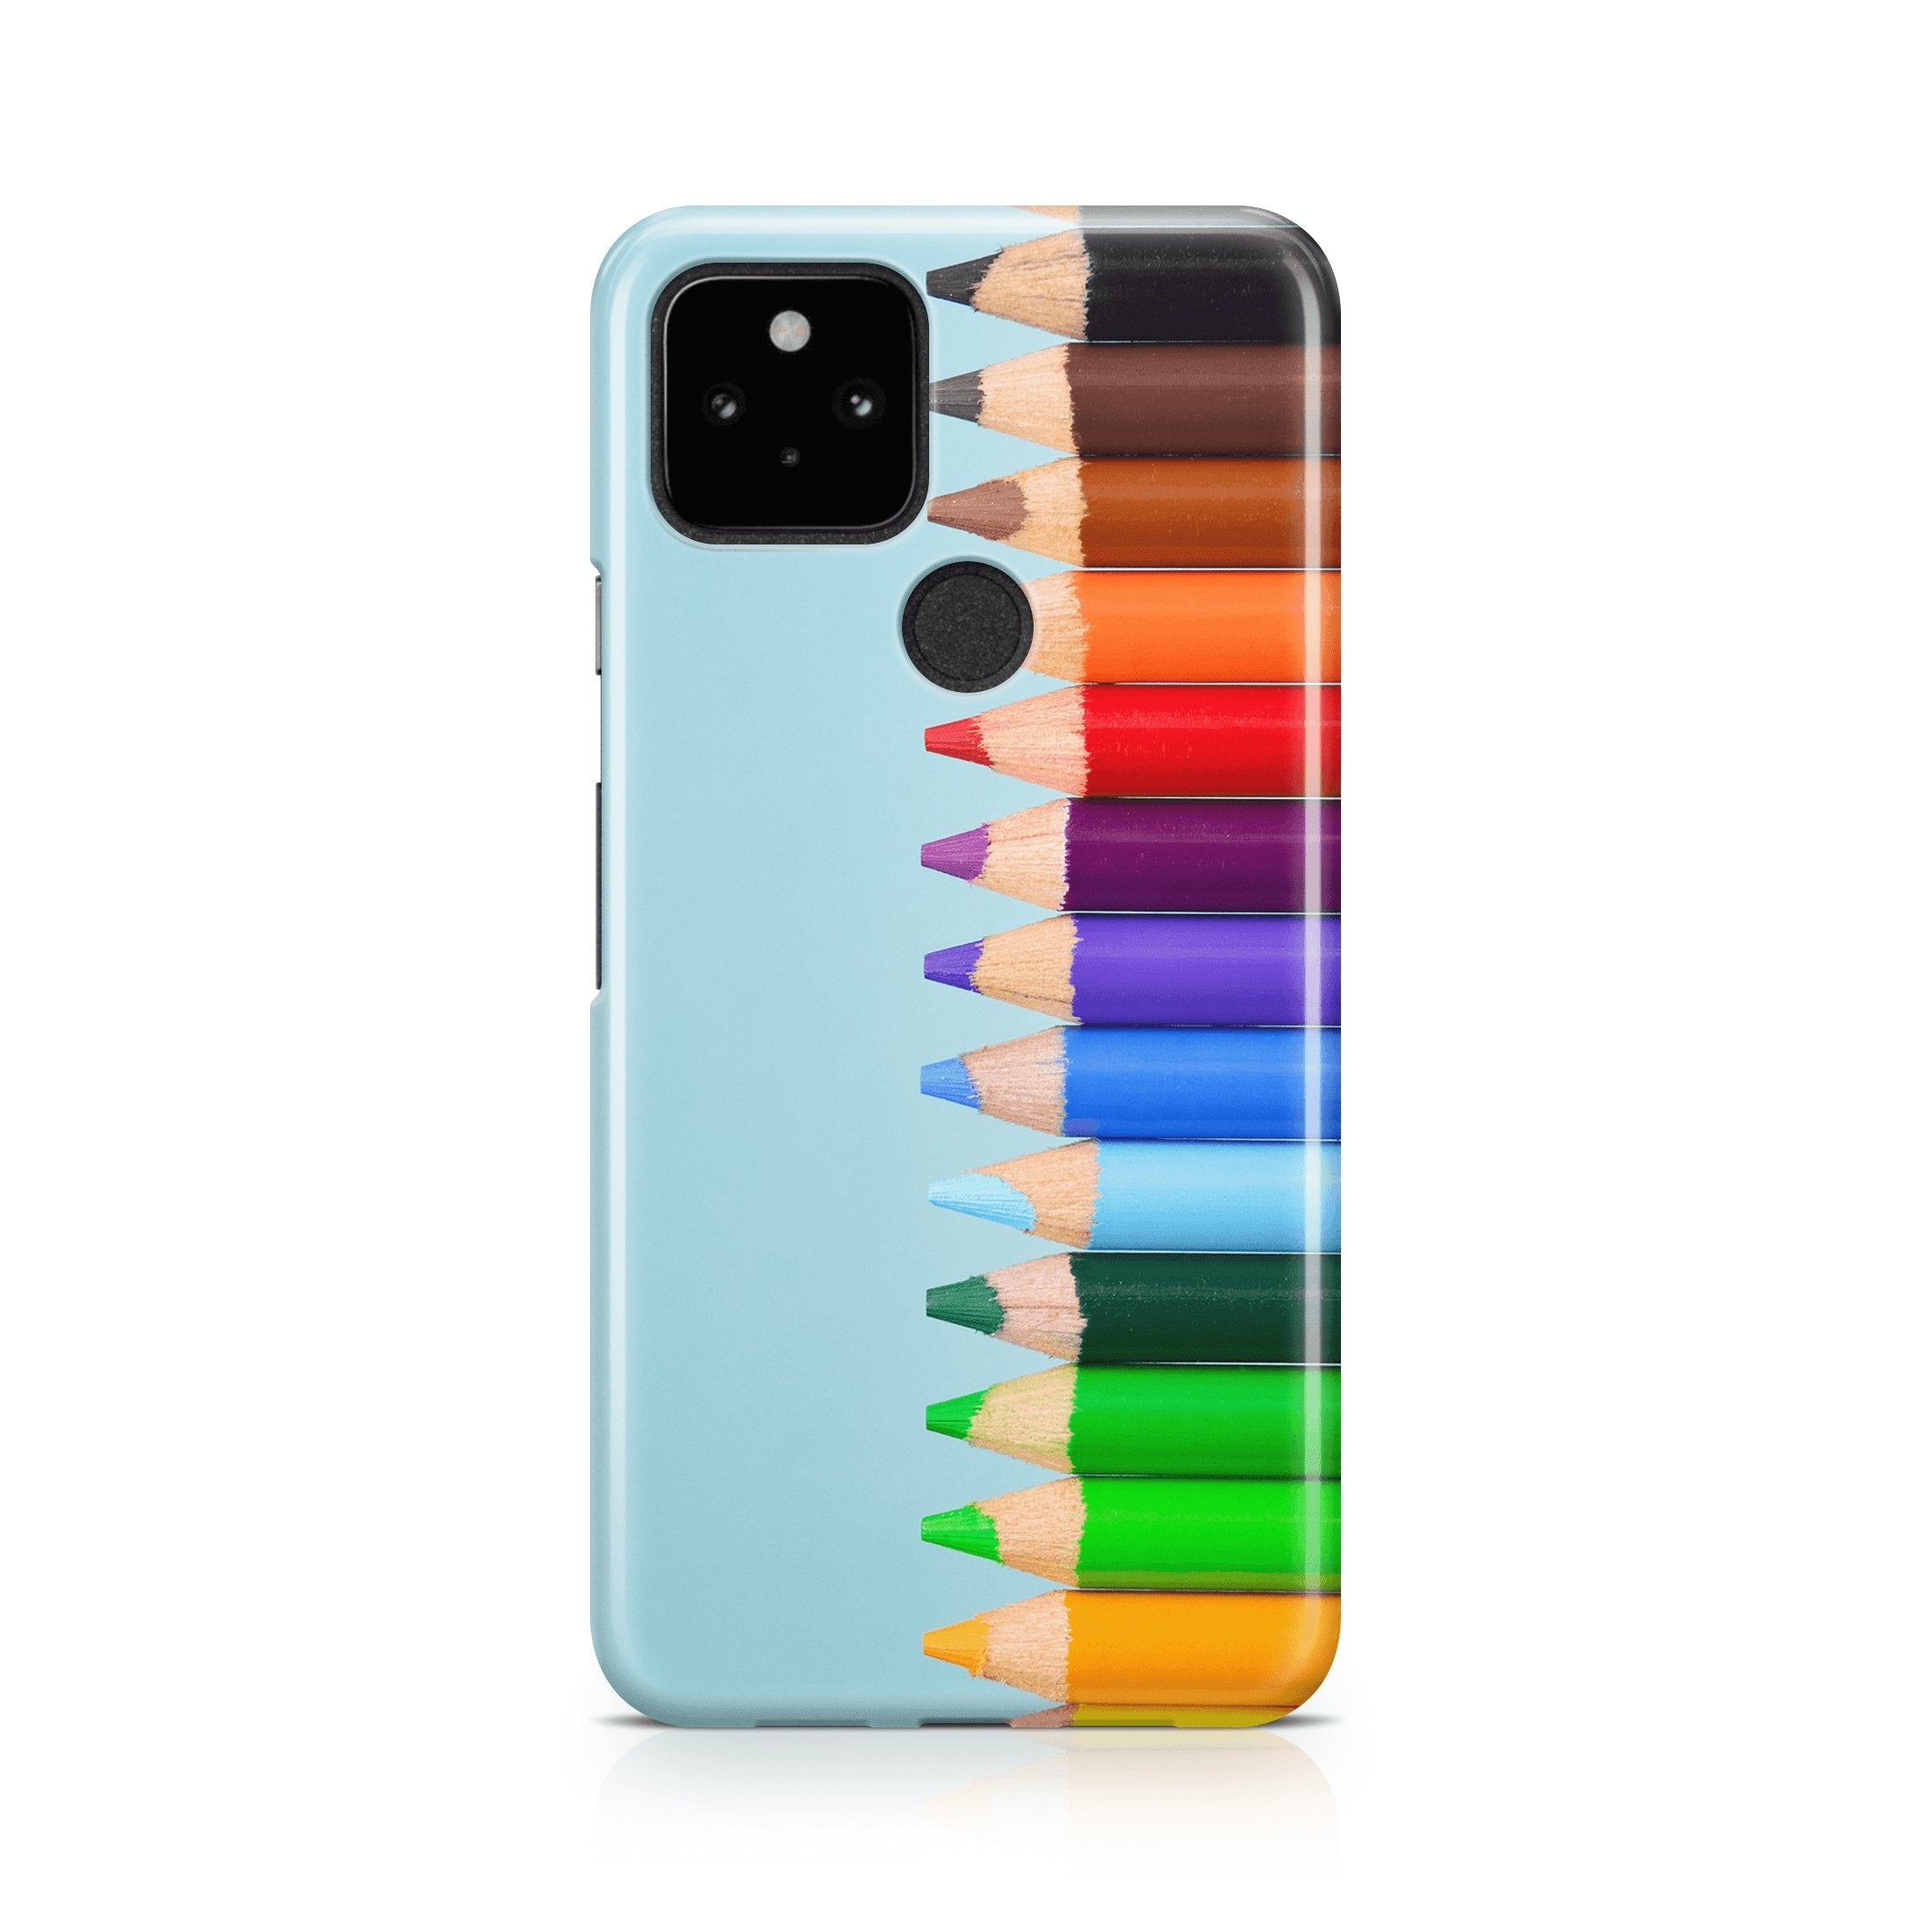 Colored Pencils - Google phone case designs by CaseSwagger